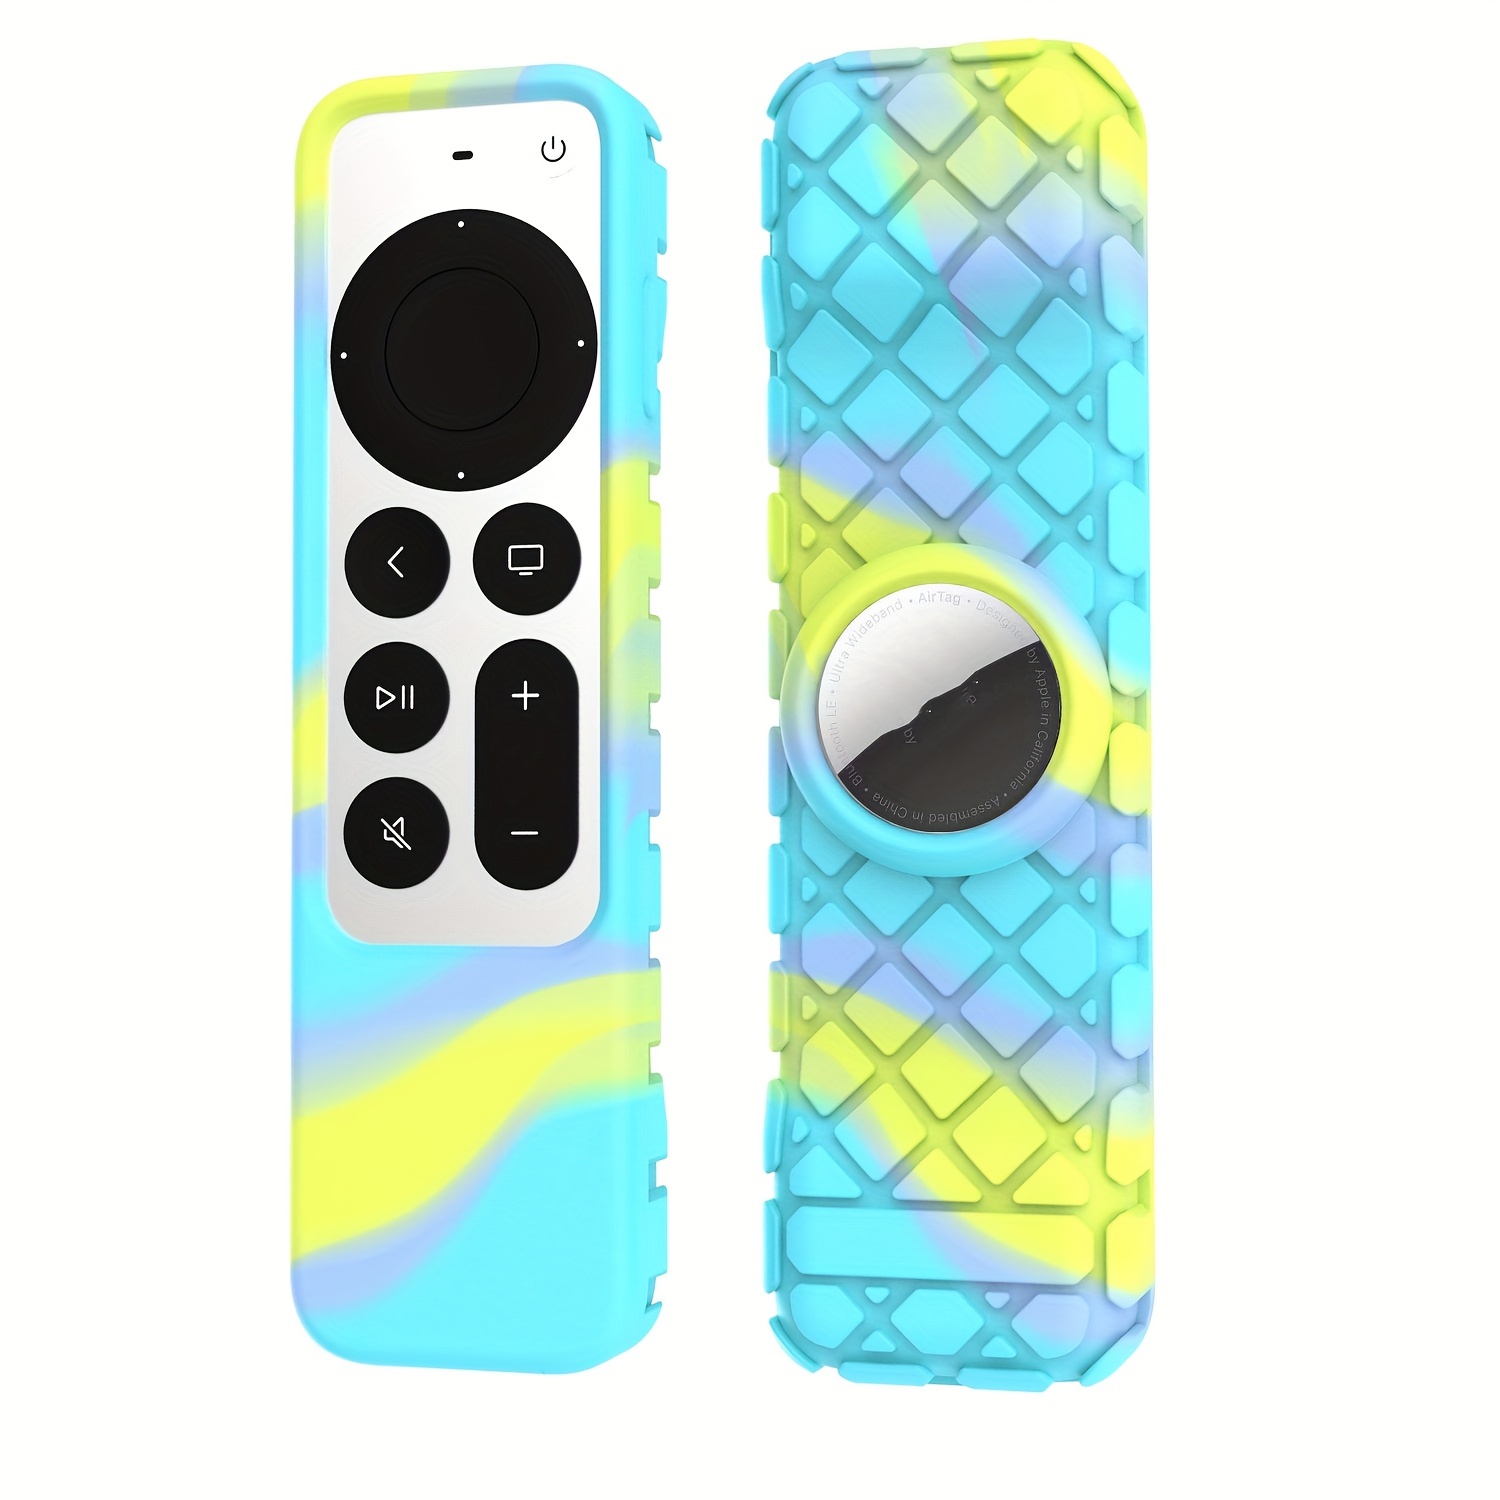 For Apple TV 4K Siri Remote 2021 Silicone Case Protective Cover for Apple  AirTag